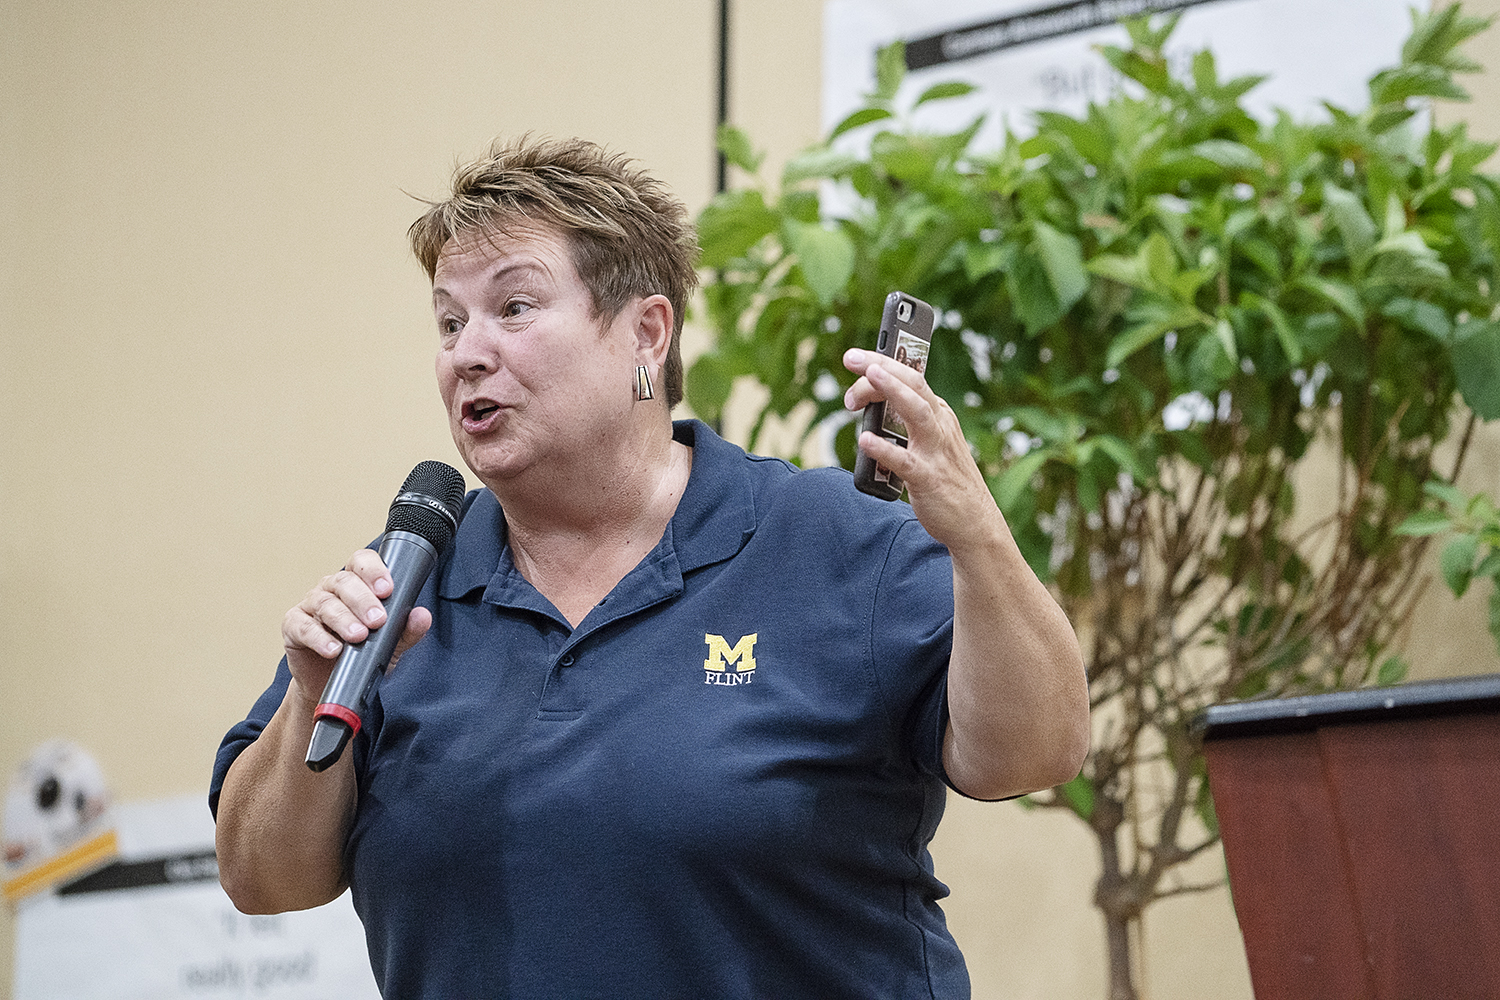 Flint, MI - Friday, May 4, 2018: University of Michigan - Flint chancellor Sue Borrego speaks to the Blueberry Ambassadors during the 5th Annual Blueberry Ambassador Awards Party at the Riverfront Banquet Center downtown.